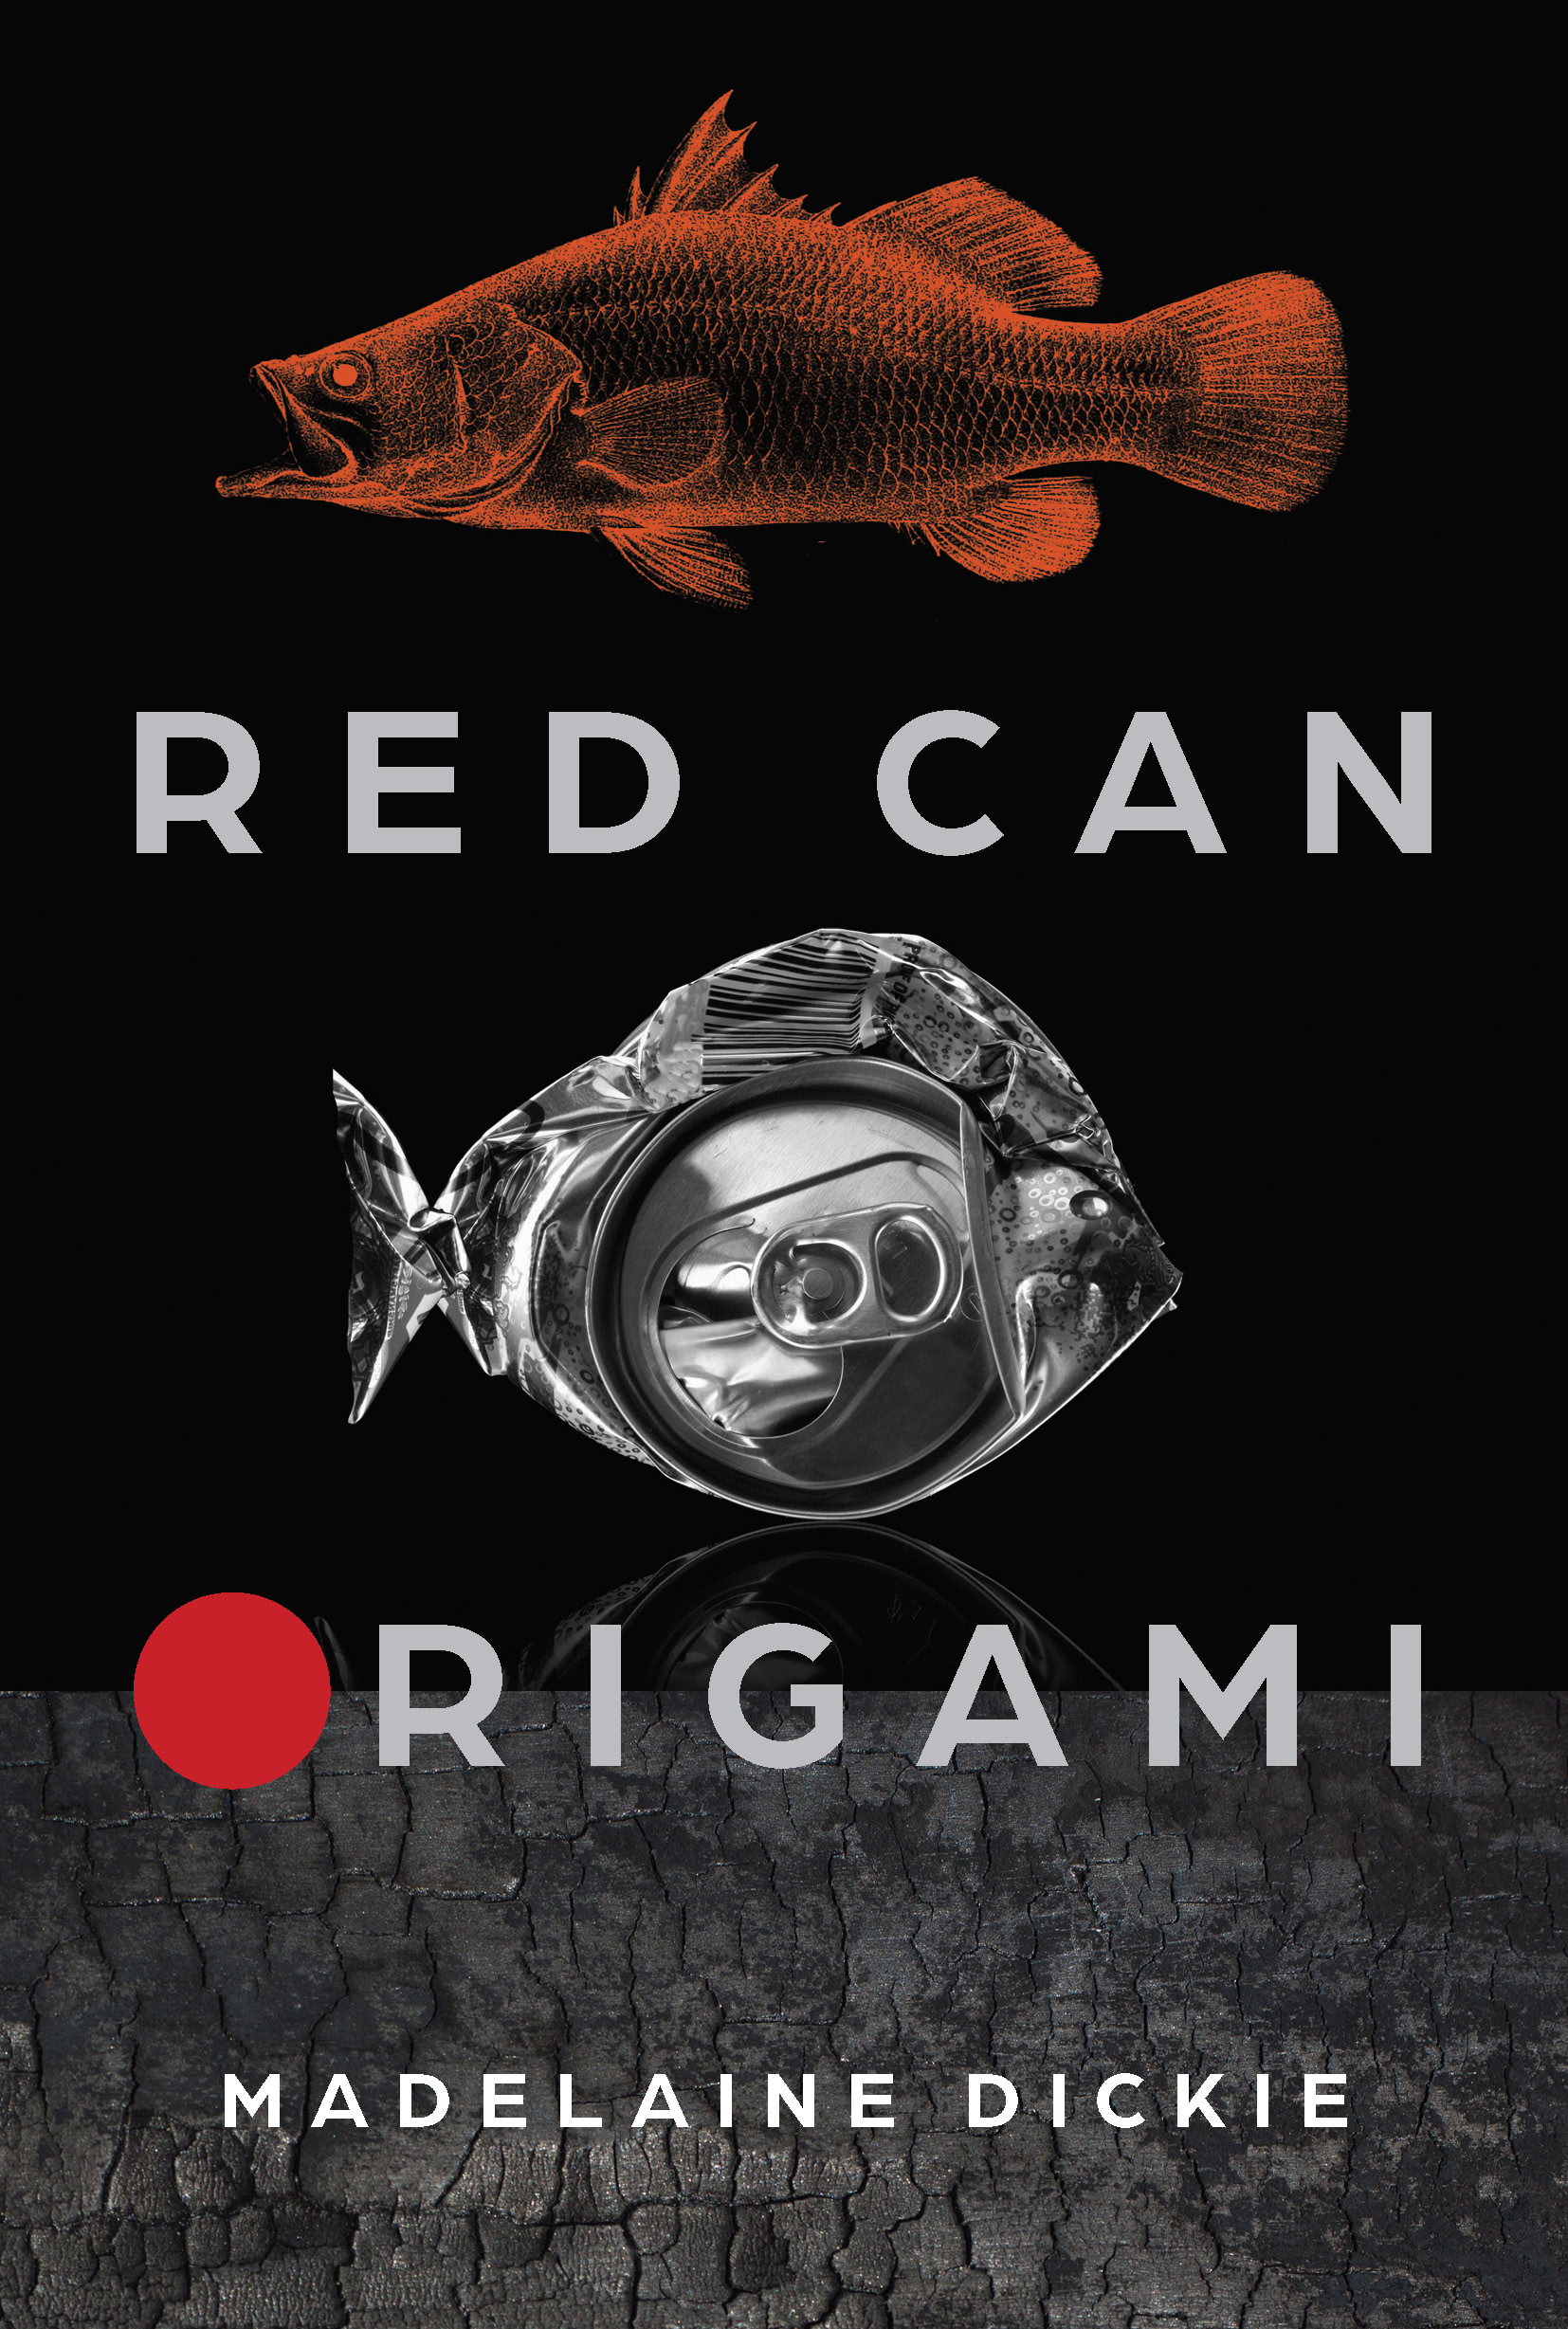 Author Madelaine Dickie talks about her latest book: Red Can Origami